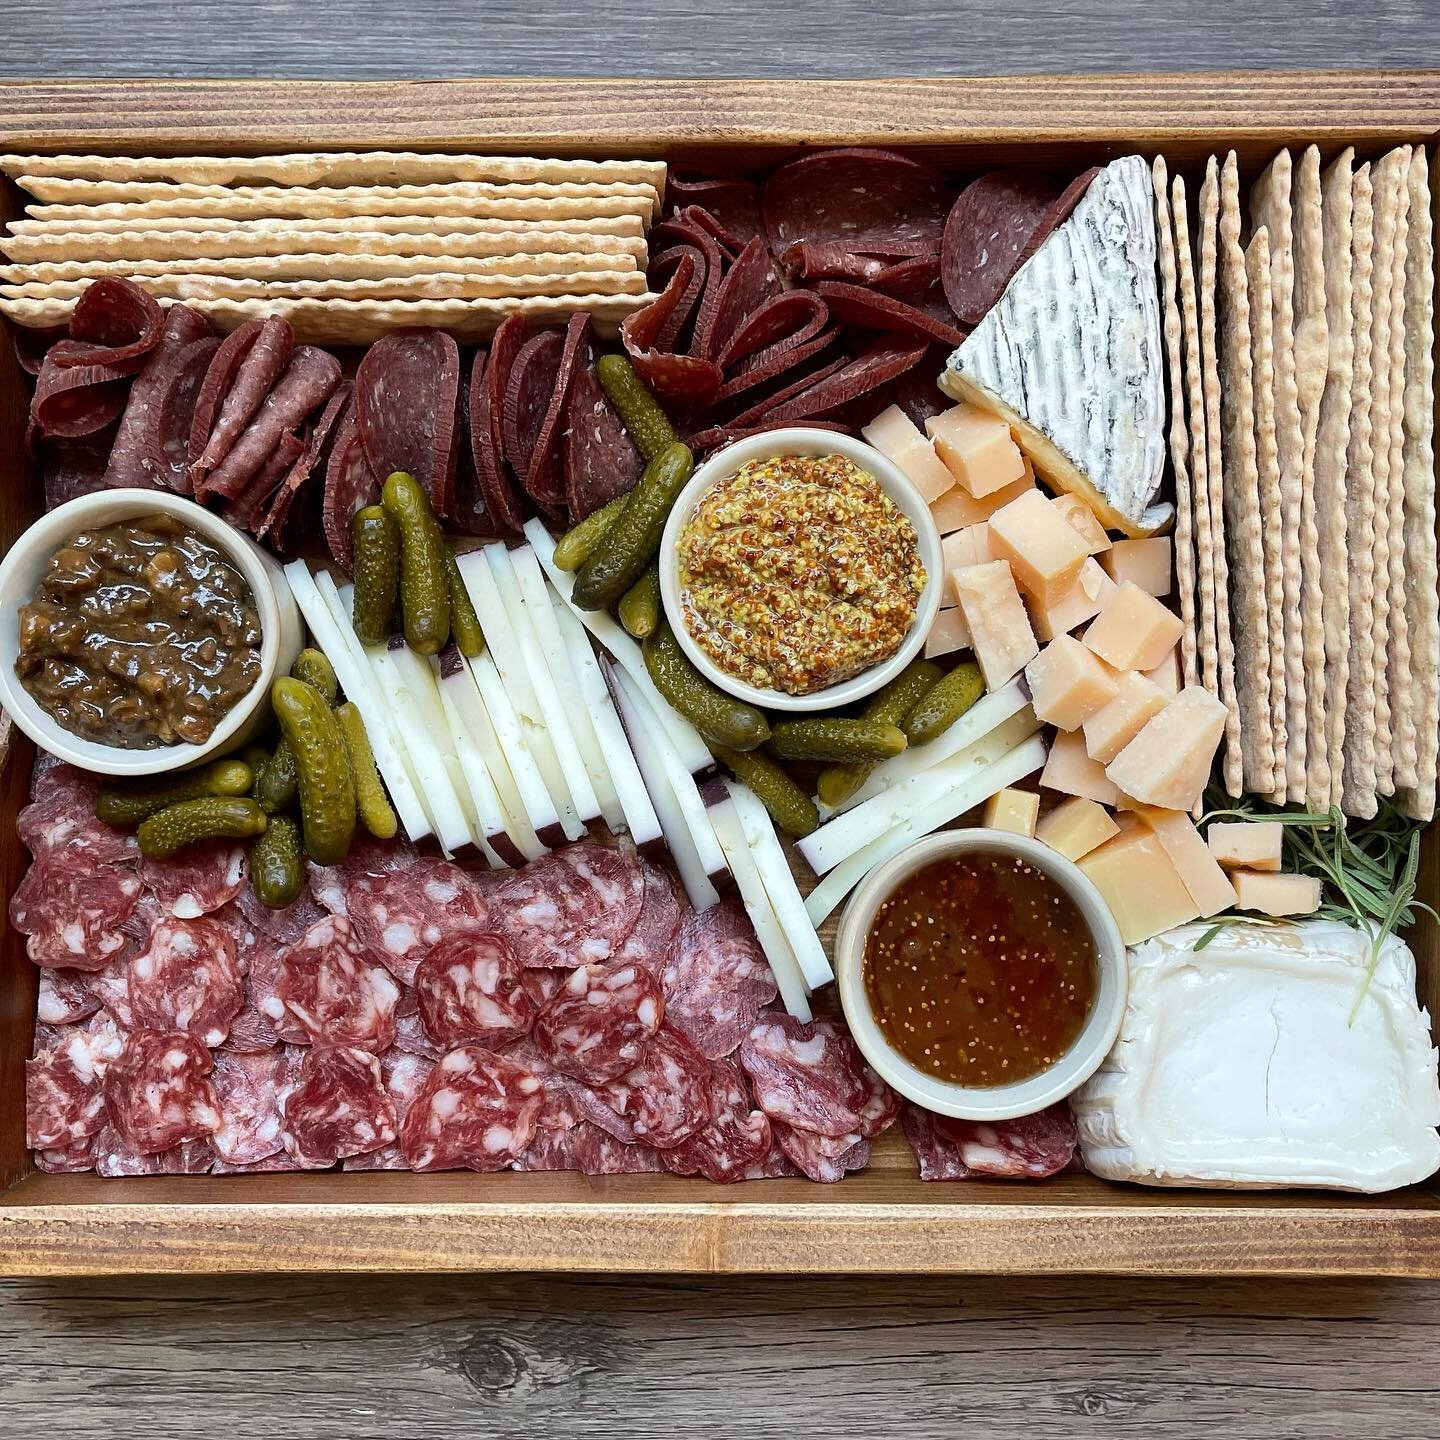 You know what makes an awesome #fathersdaygift ?! #larchmontcharcuterie 🍷🤩💯 Order online today to ensure delivery on time! Link in bio #charcuterieboard #charcuterie #saucisson #saucissonsec #bresaola #beefsaucisson #giftideas #fathersday2021 #sup